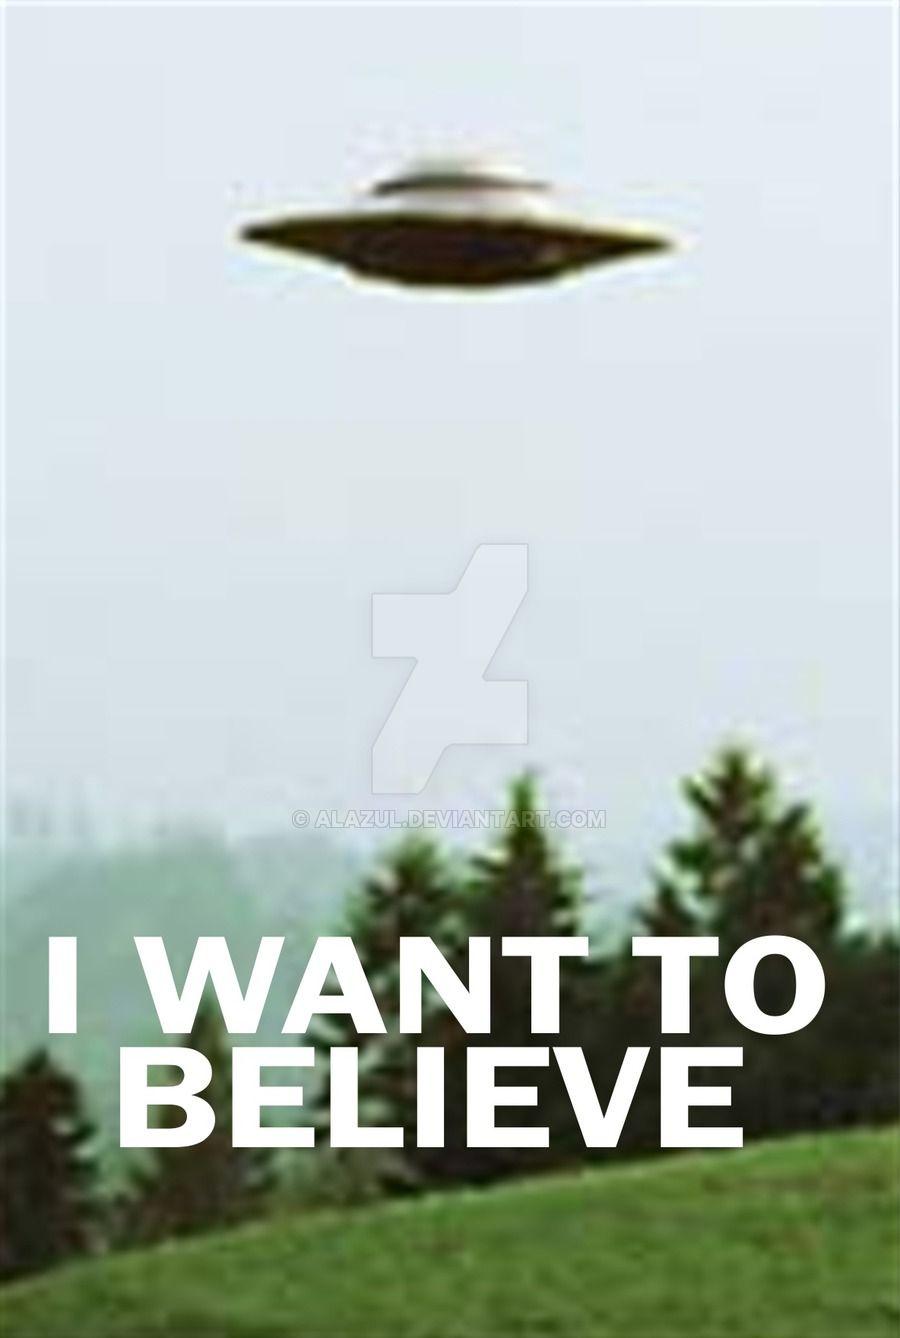 Started to believe. I want to believe плакат. I want to believe обои. Плакат секретные материалы i want to believe. Обои на айфон i want to believe.